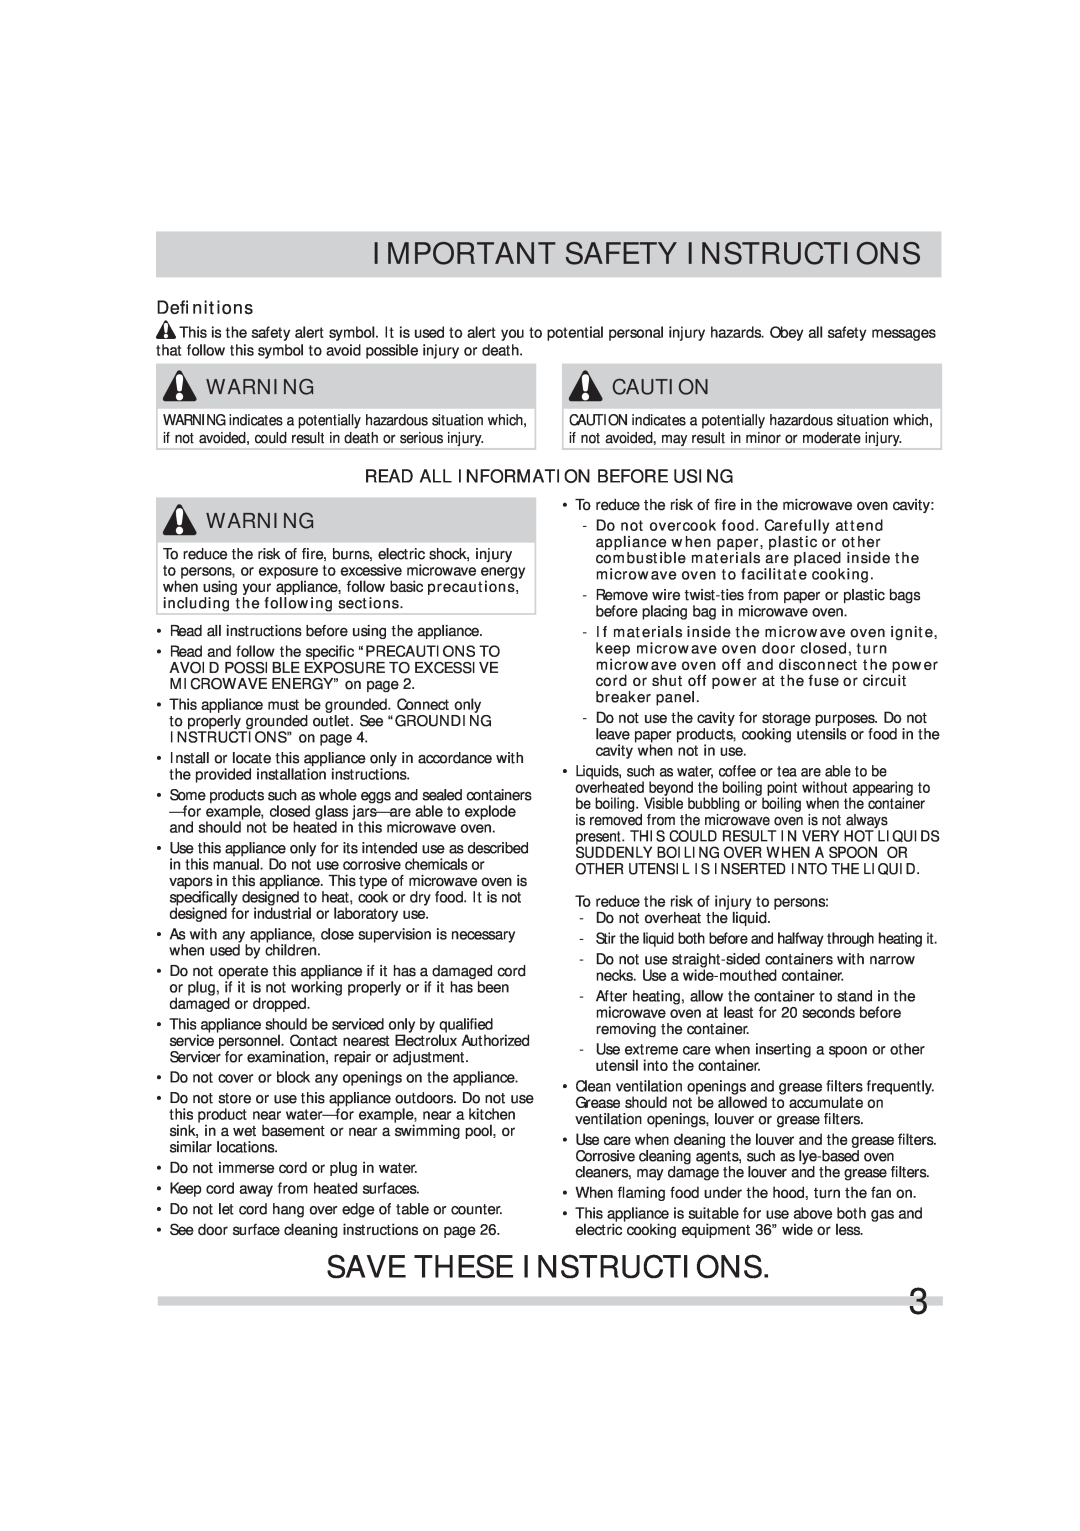 Frigidaire 316495054 Save These Instructions, Deﬁnitions, Read All Information Before Using, Important Safety Instructions 